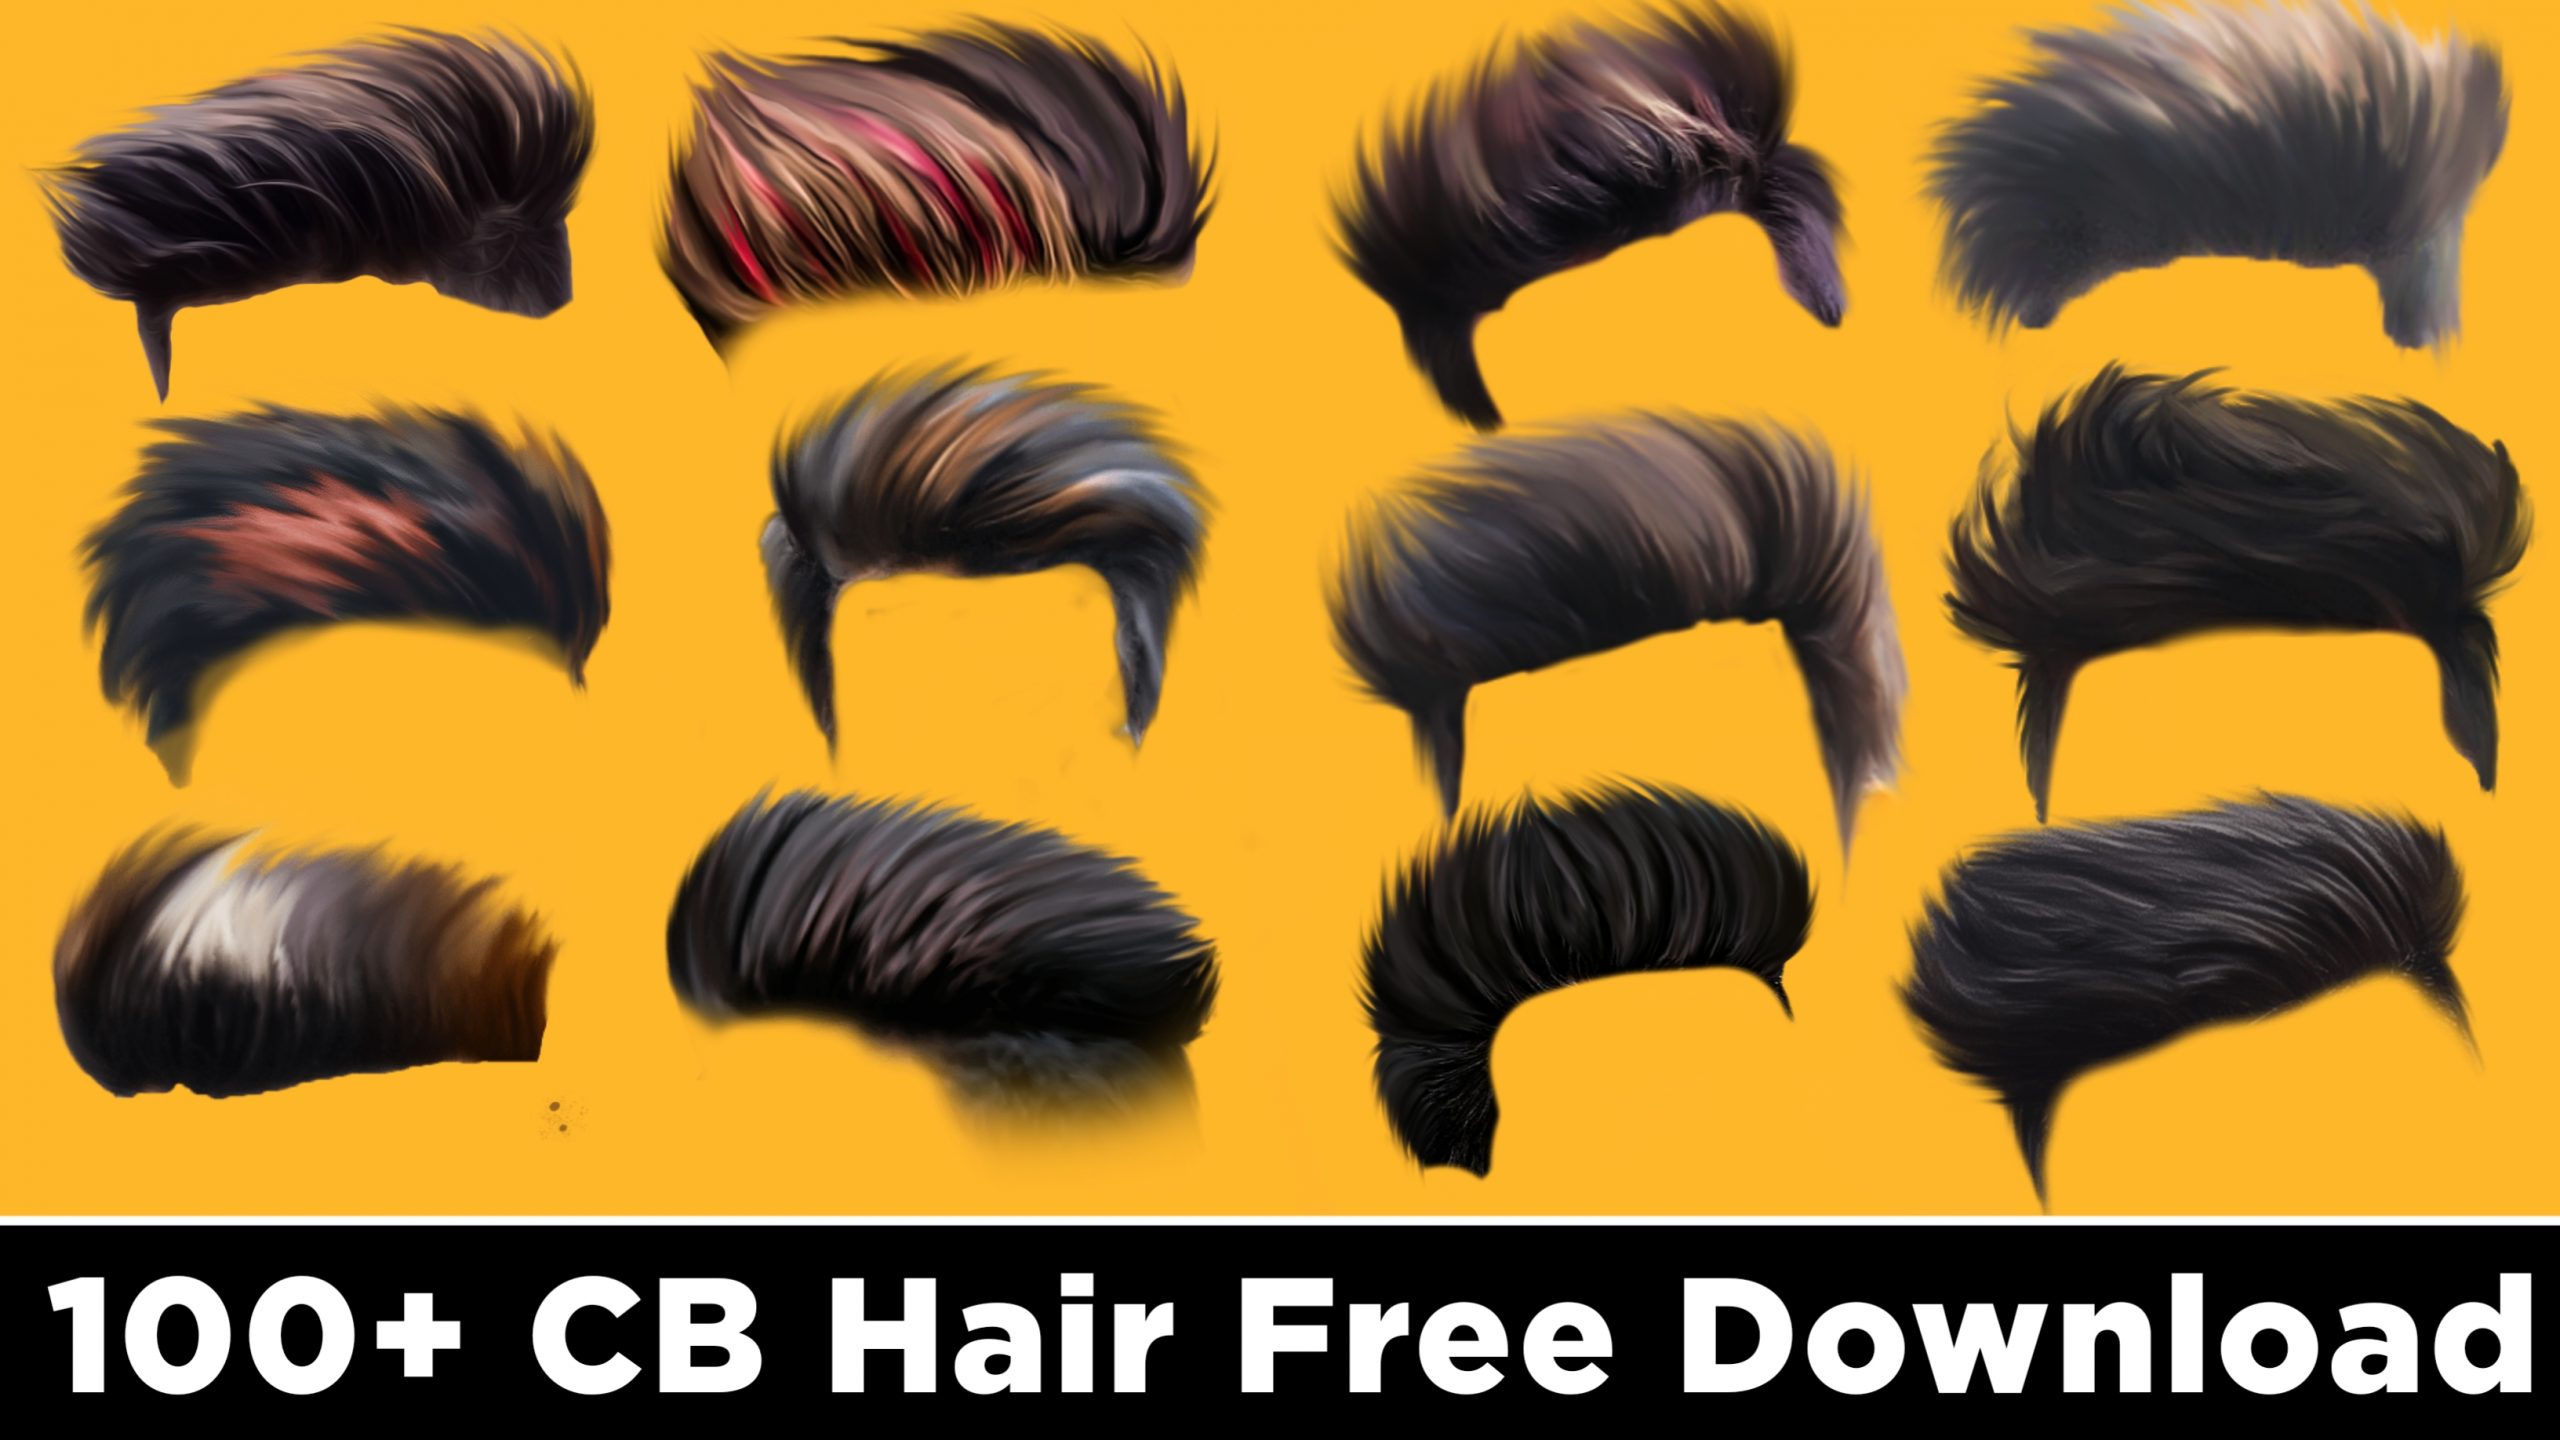 100+ New CB Hair PNG For Picsart and Photoshop Latest Collection - Tahir  Editz